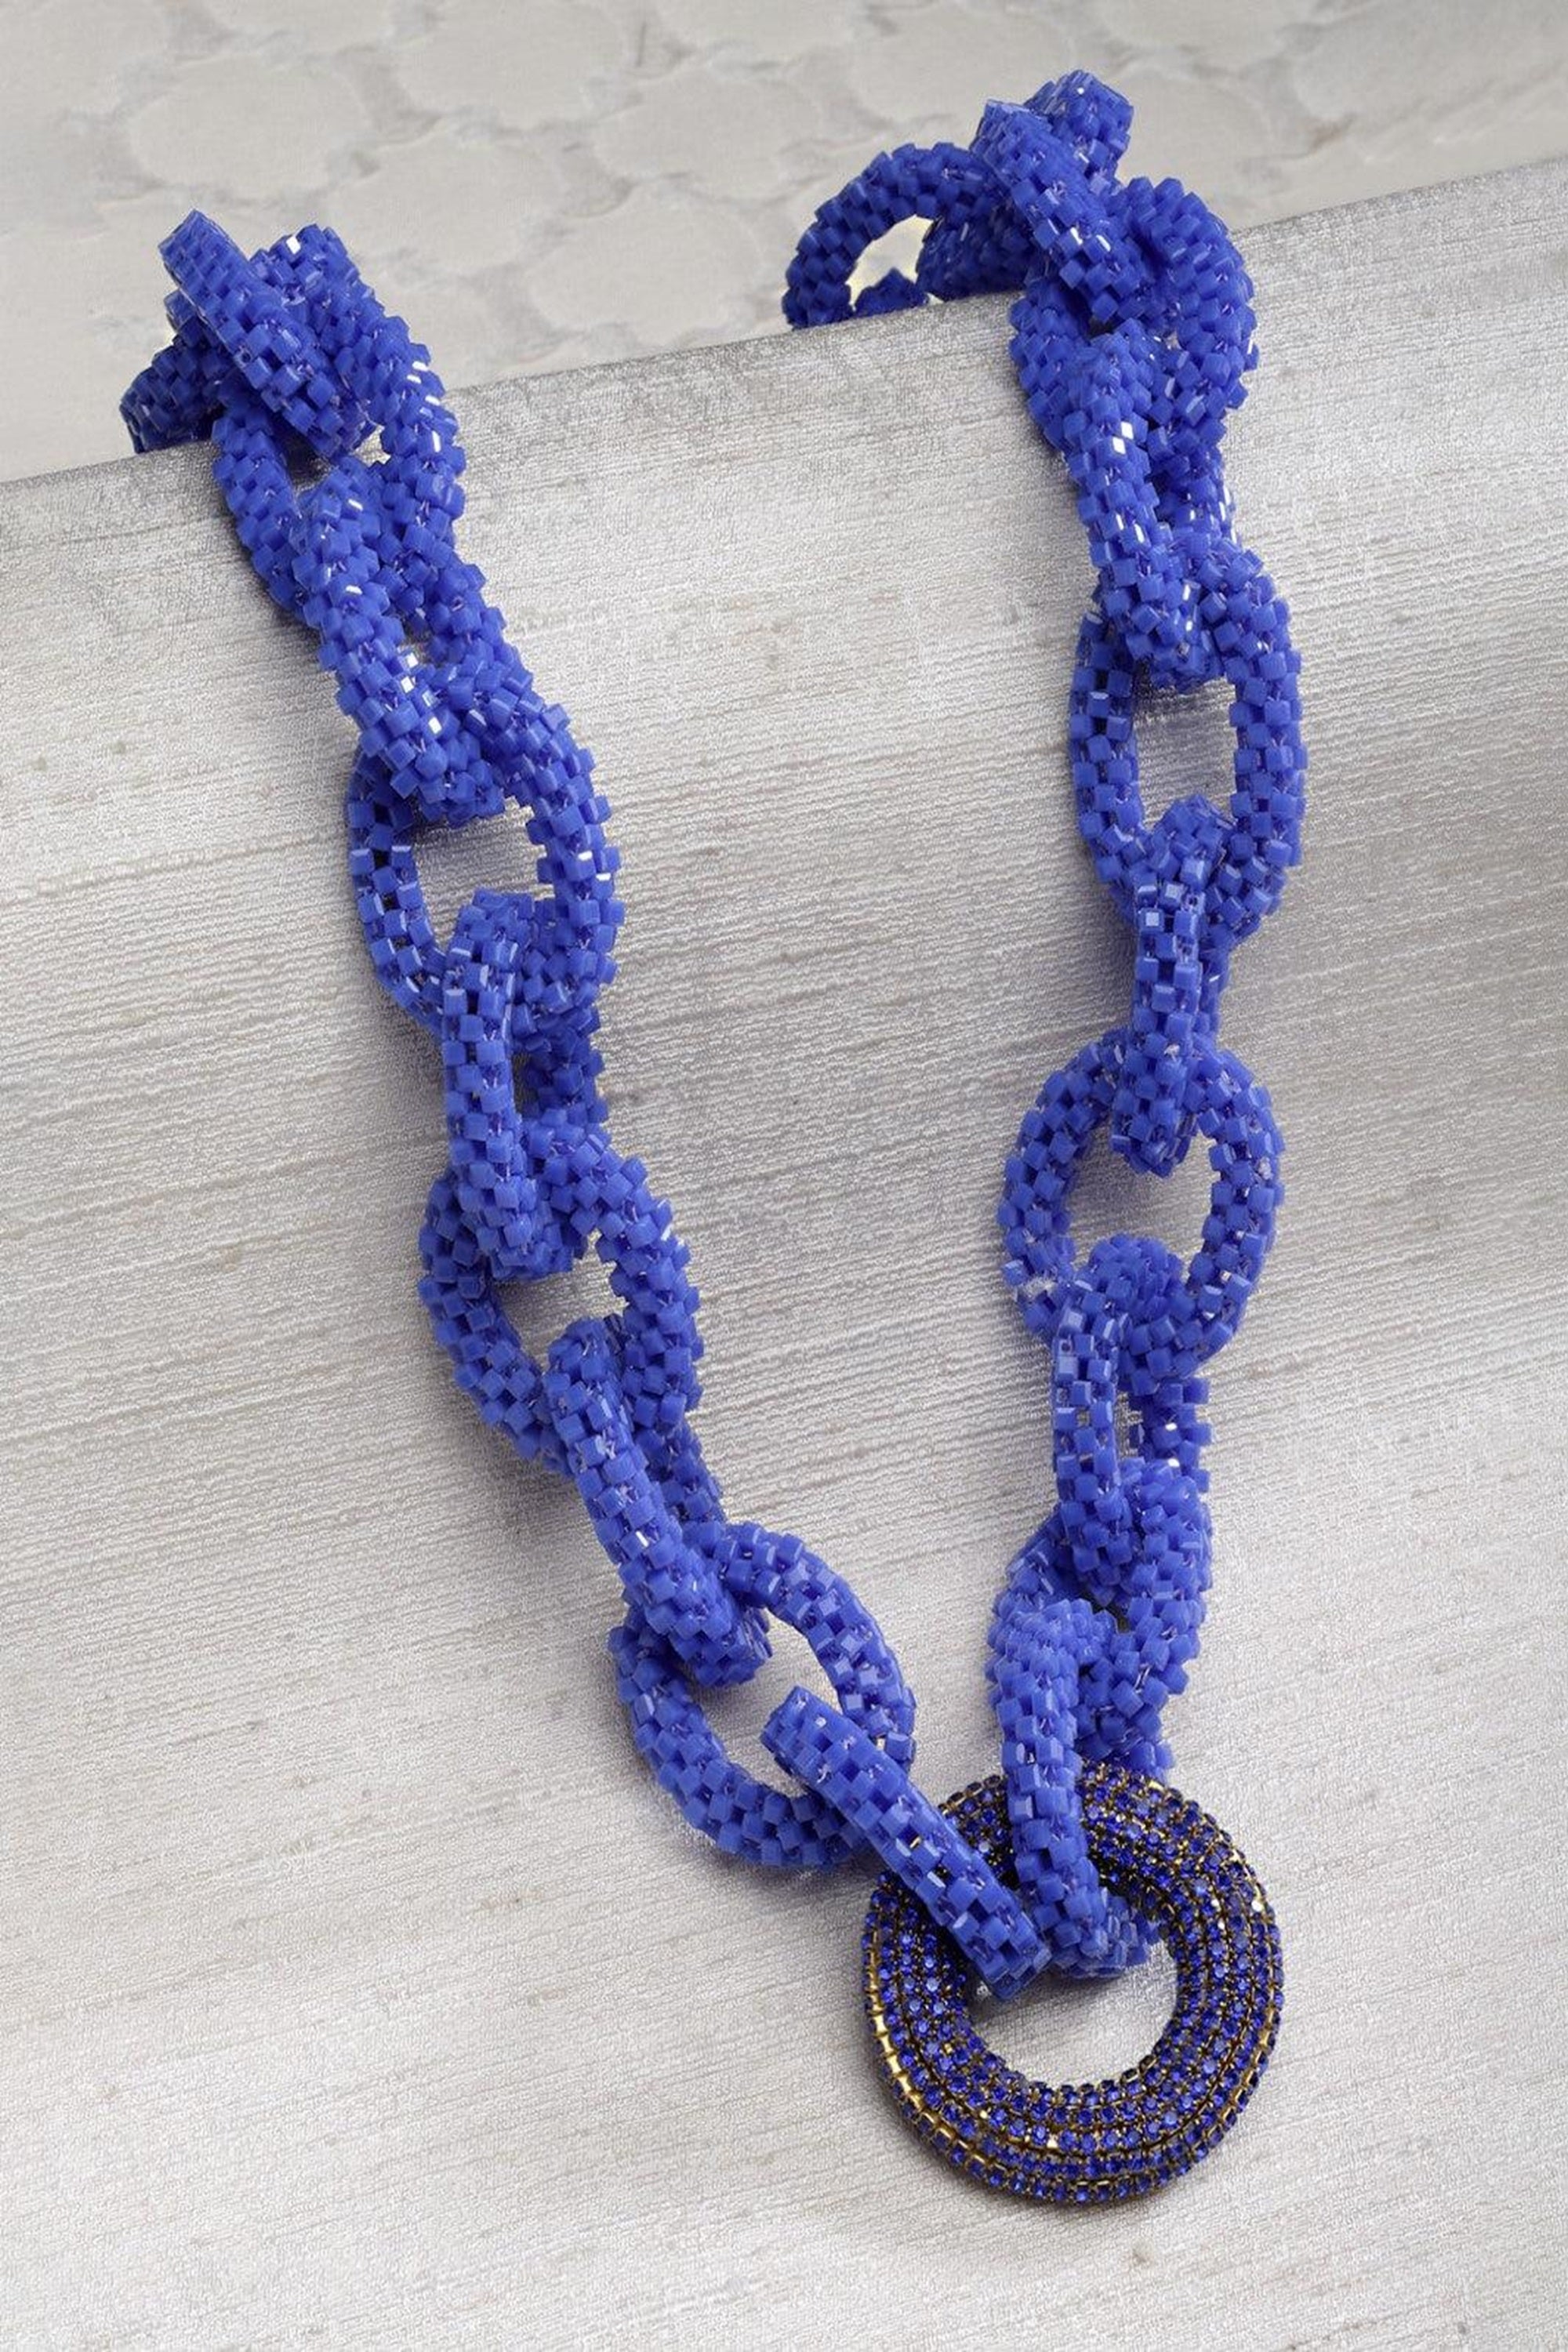 Link chain necklace with a round pendant